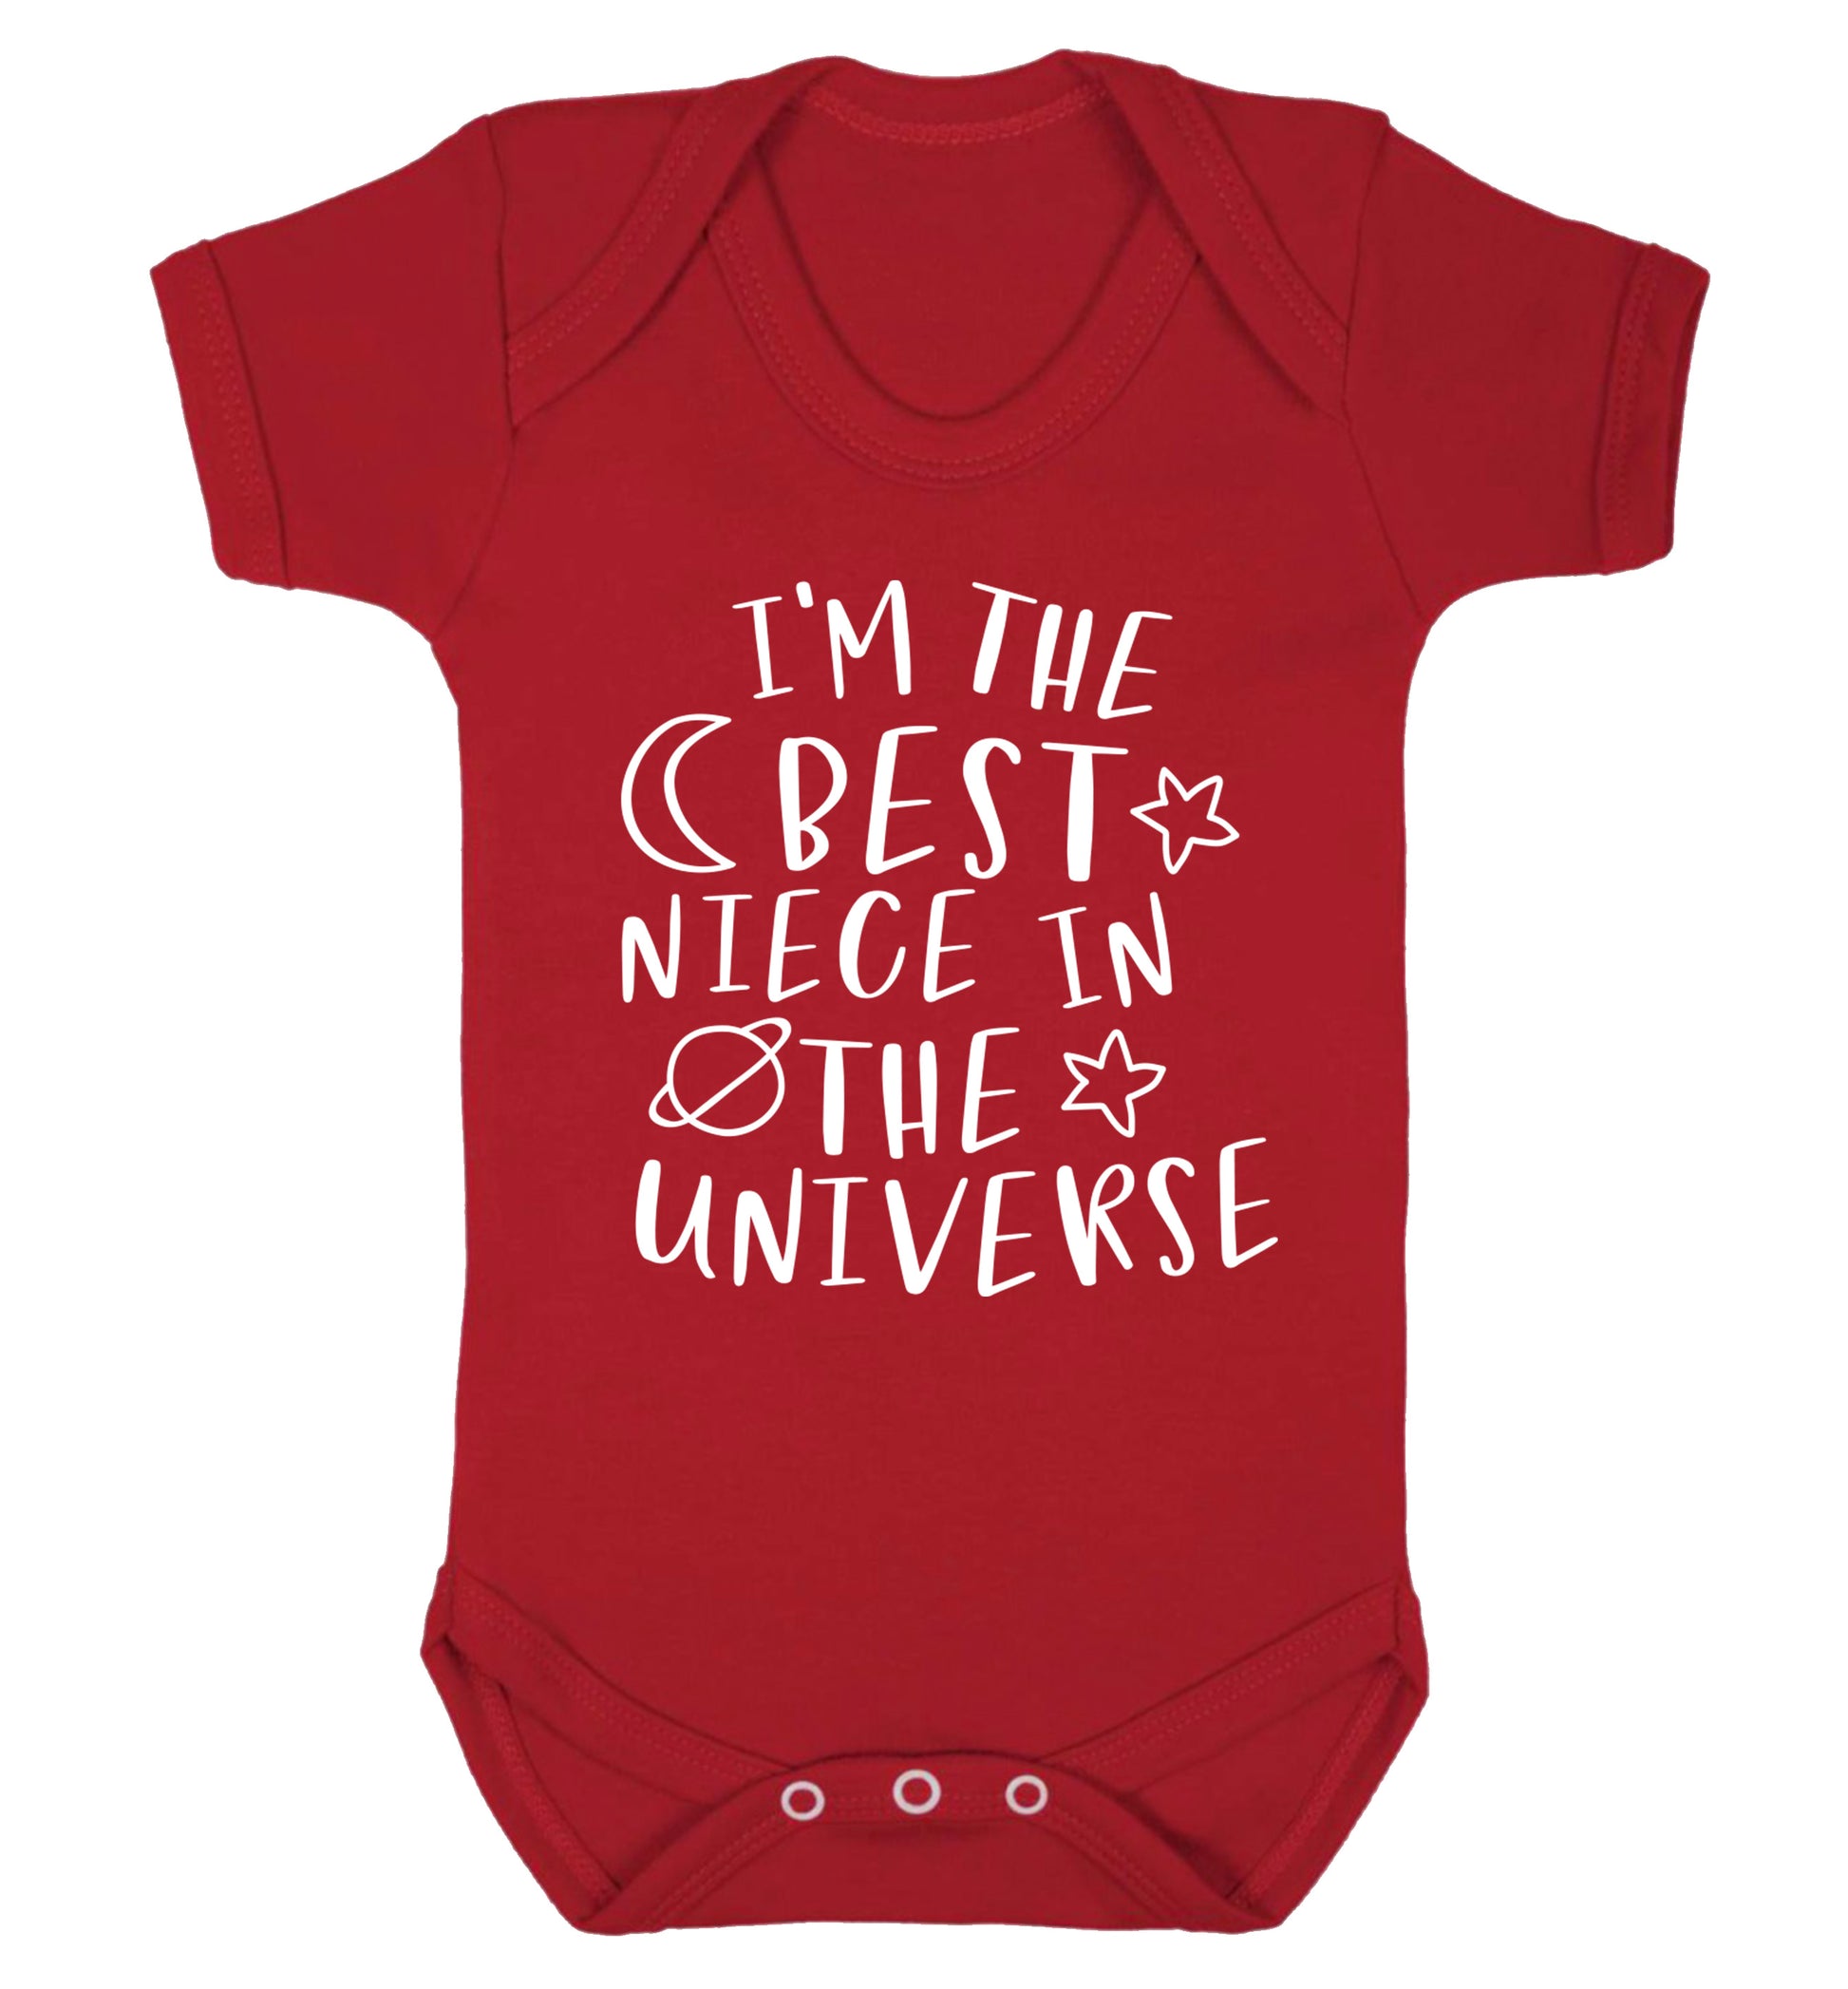 I'm the best niece in the universe Baby Vest red 18-24 months